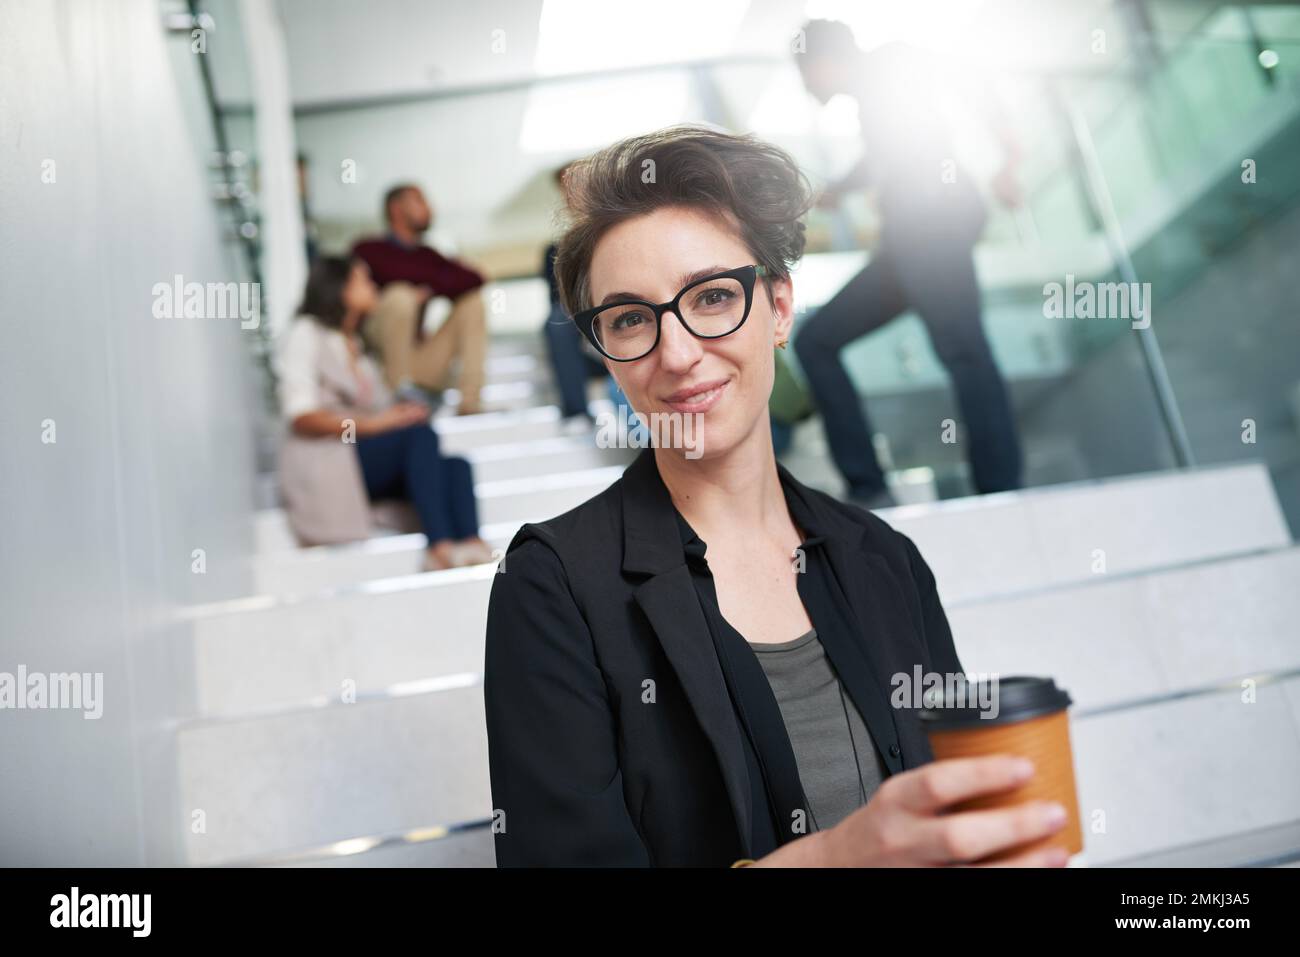 You need the right attitude to succeed. Portrait of a young creative sitting on a staircase in a modern office with colleagues in the background. Stock Photo